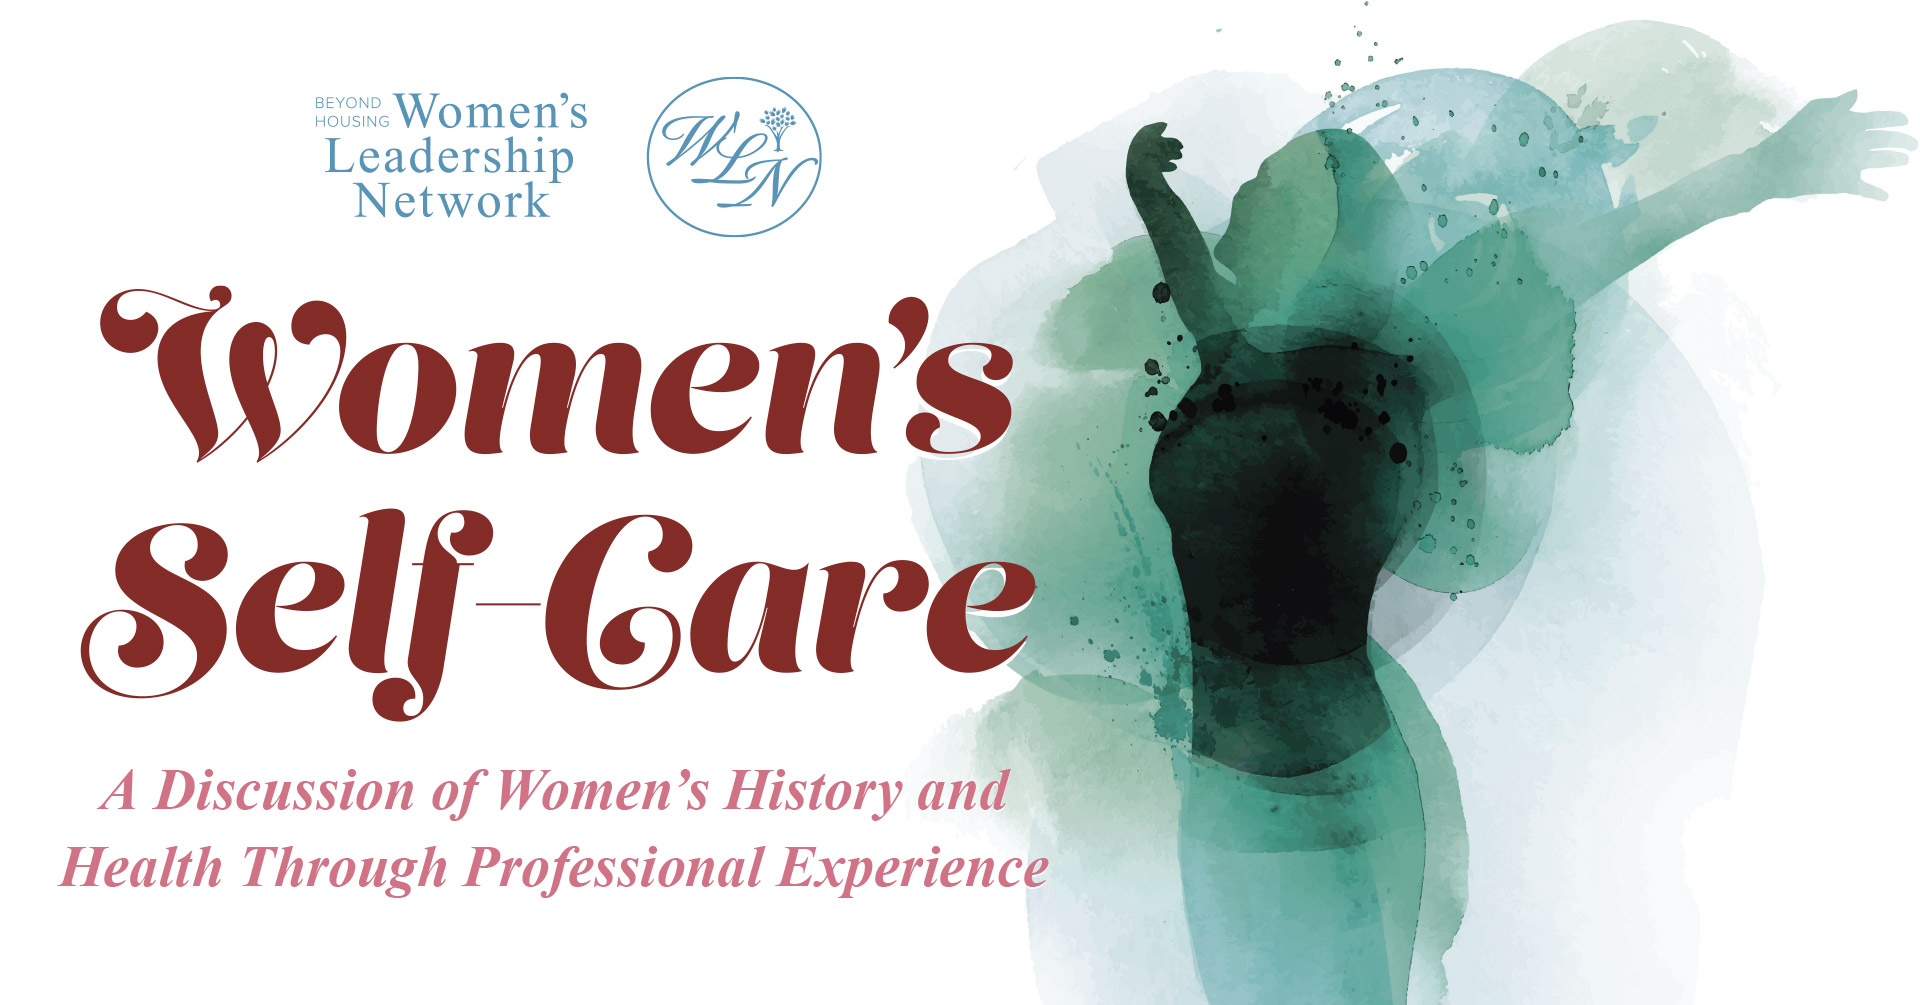 Women's Self-Care - A Discussion of Women's History and Health Through Professional Experience